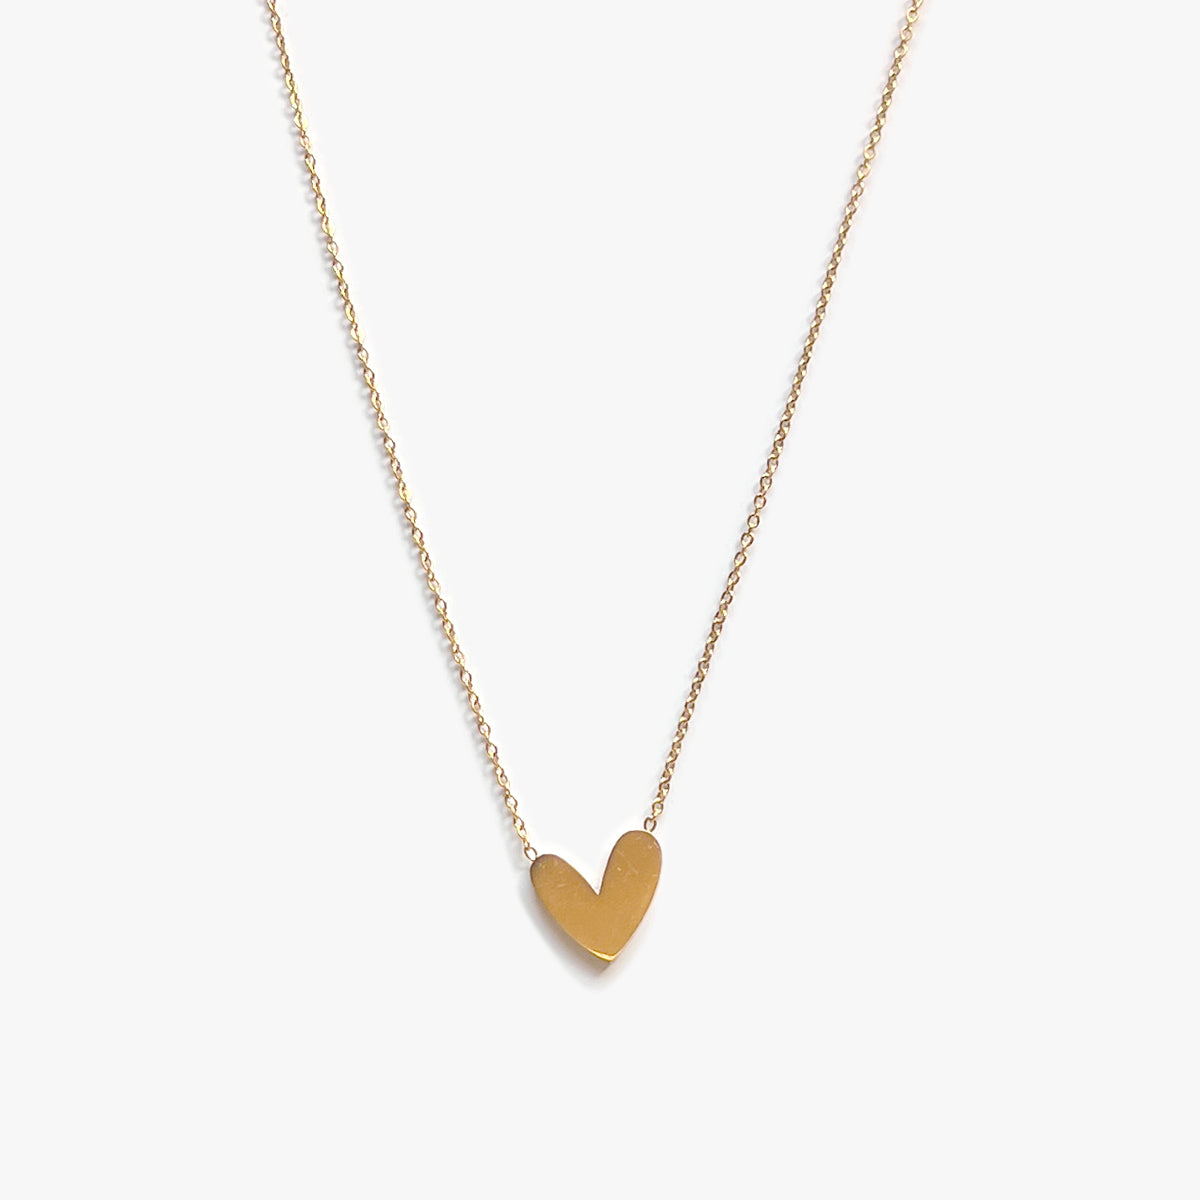 The Pearl Heart Reversible Necklace